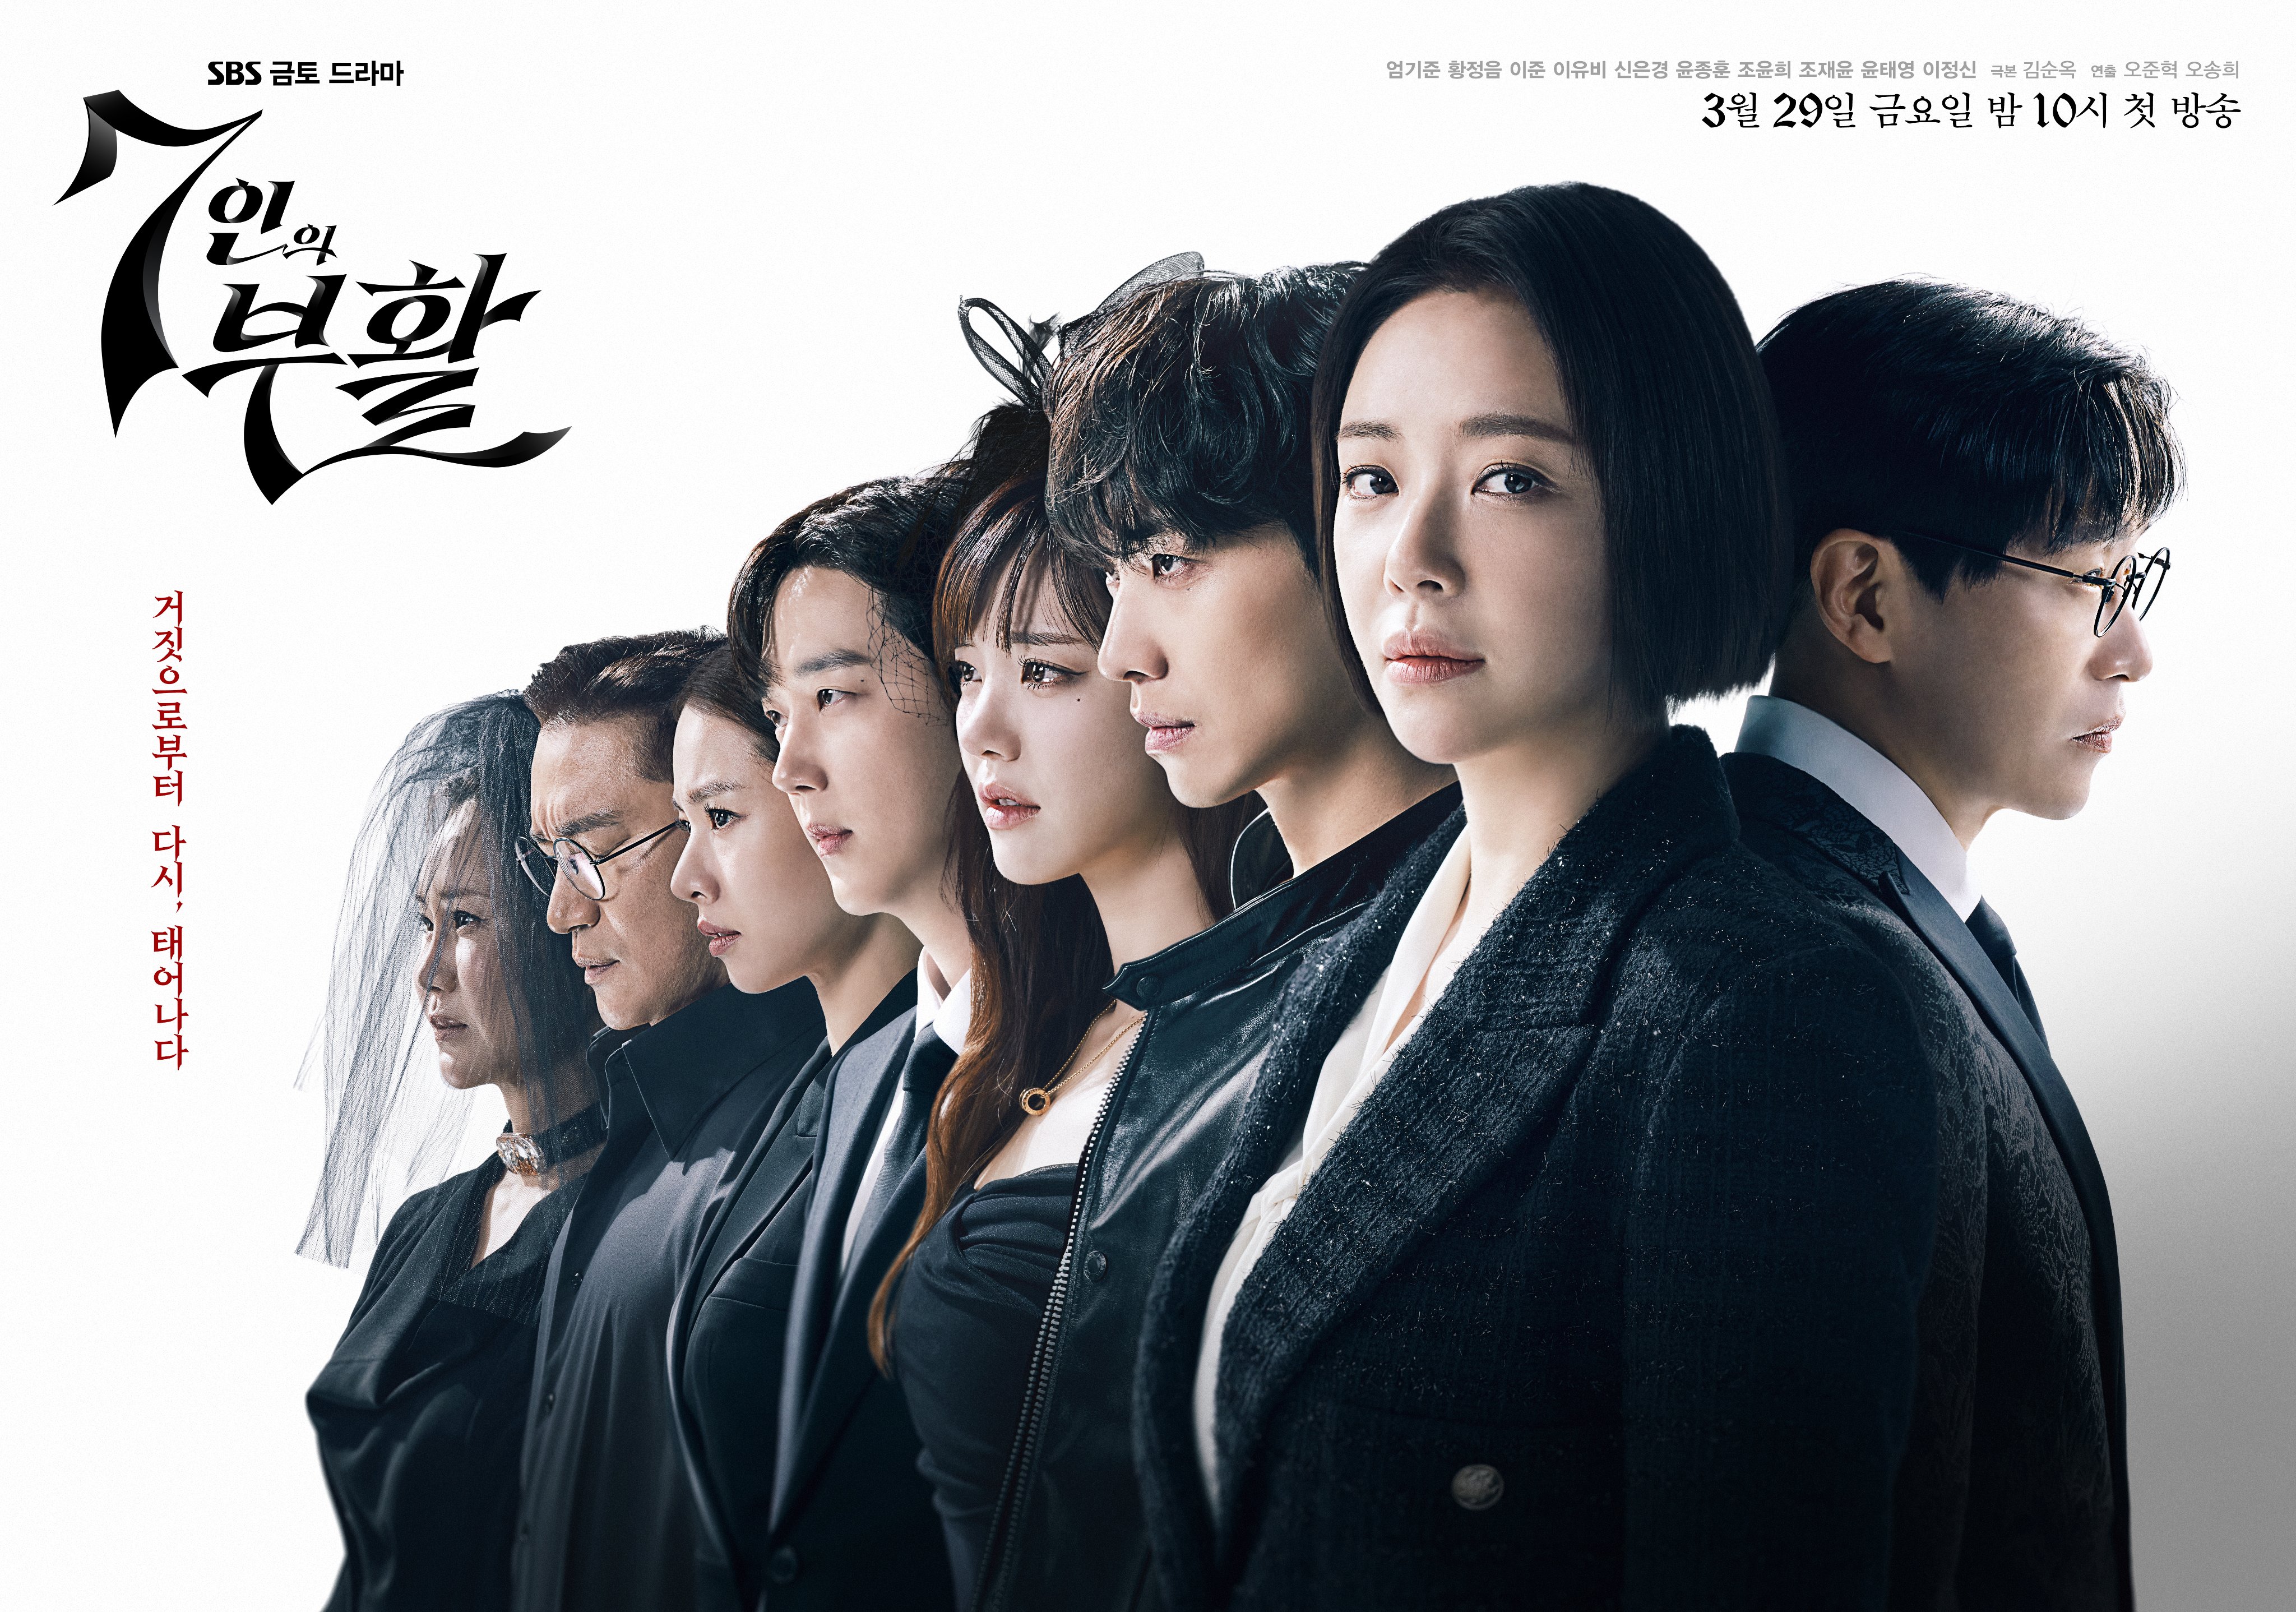 Hwang Jung Eum, Lee Joon, And More Have Their Backs Against Uhm Ki Joon In “The Escape Of The Seven: Resurrection” Poster